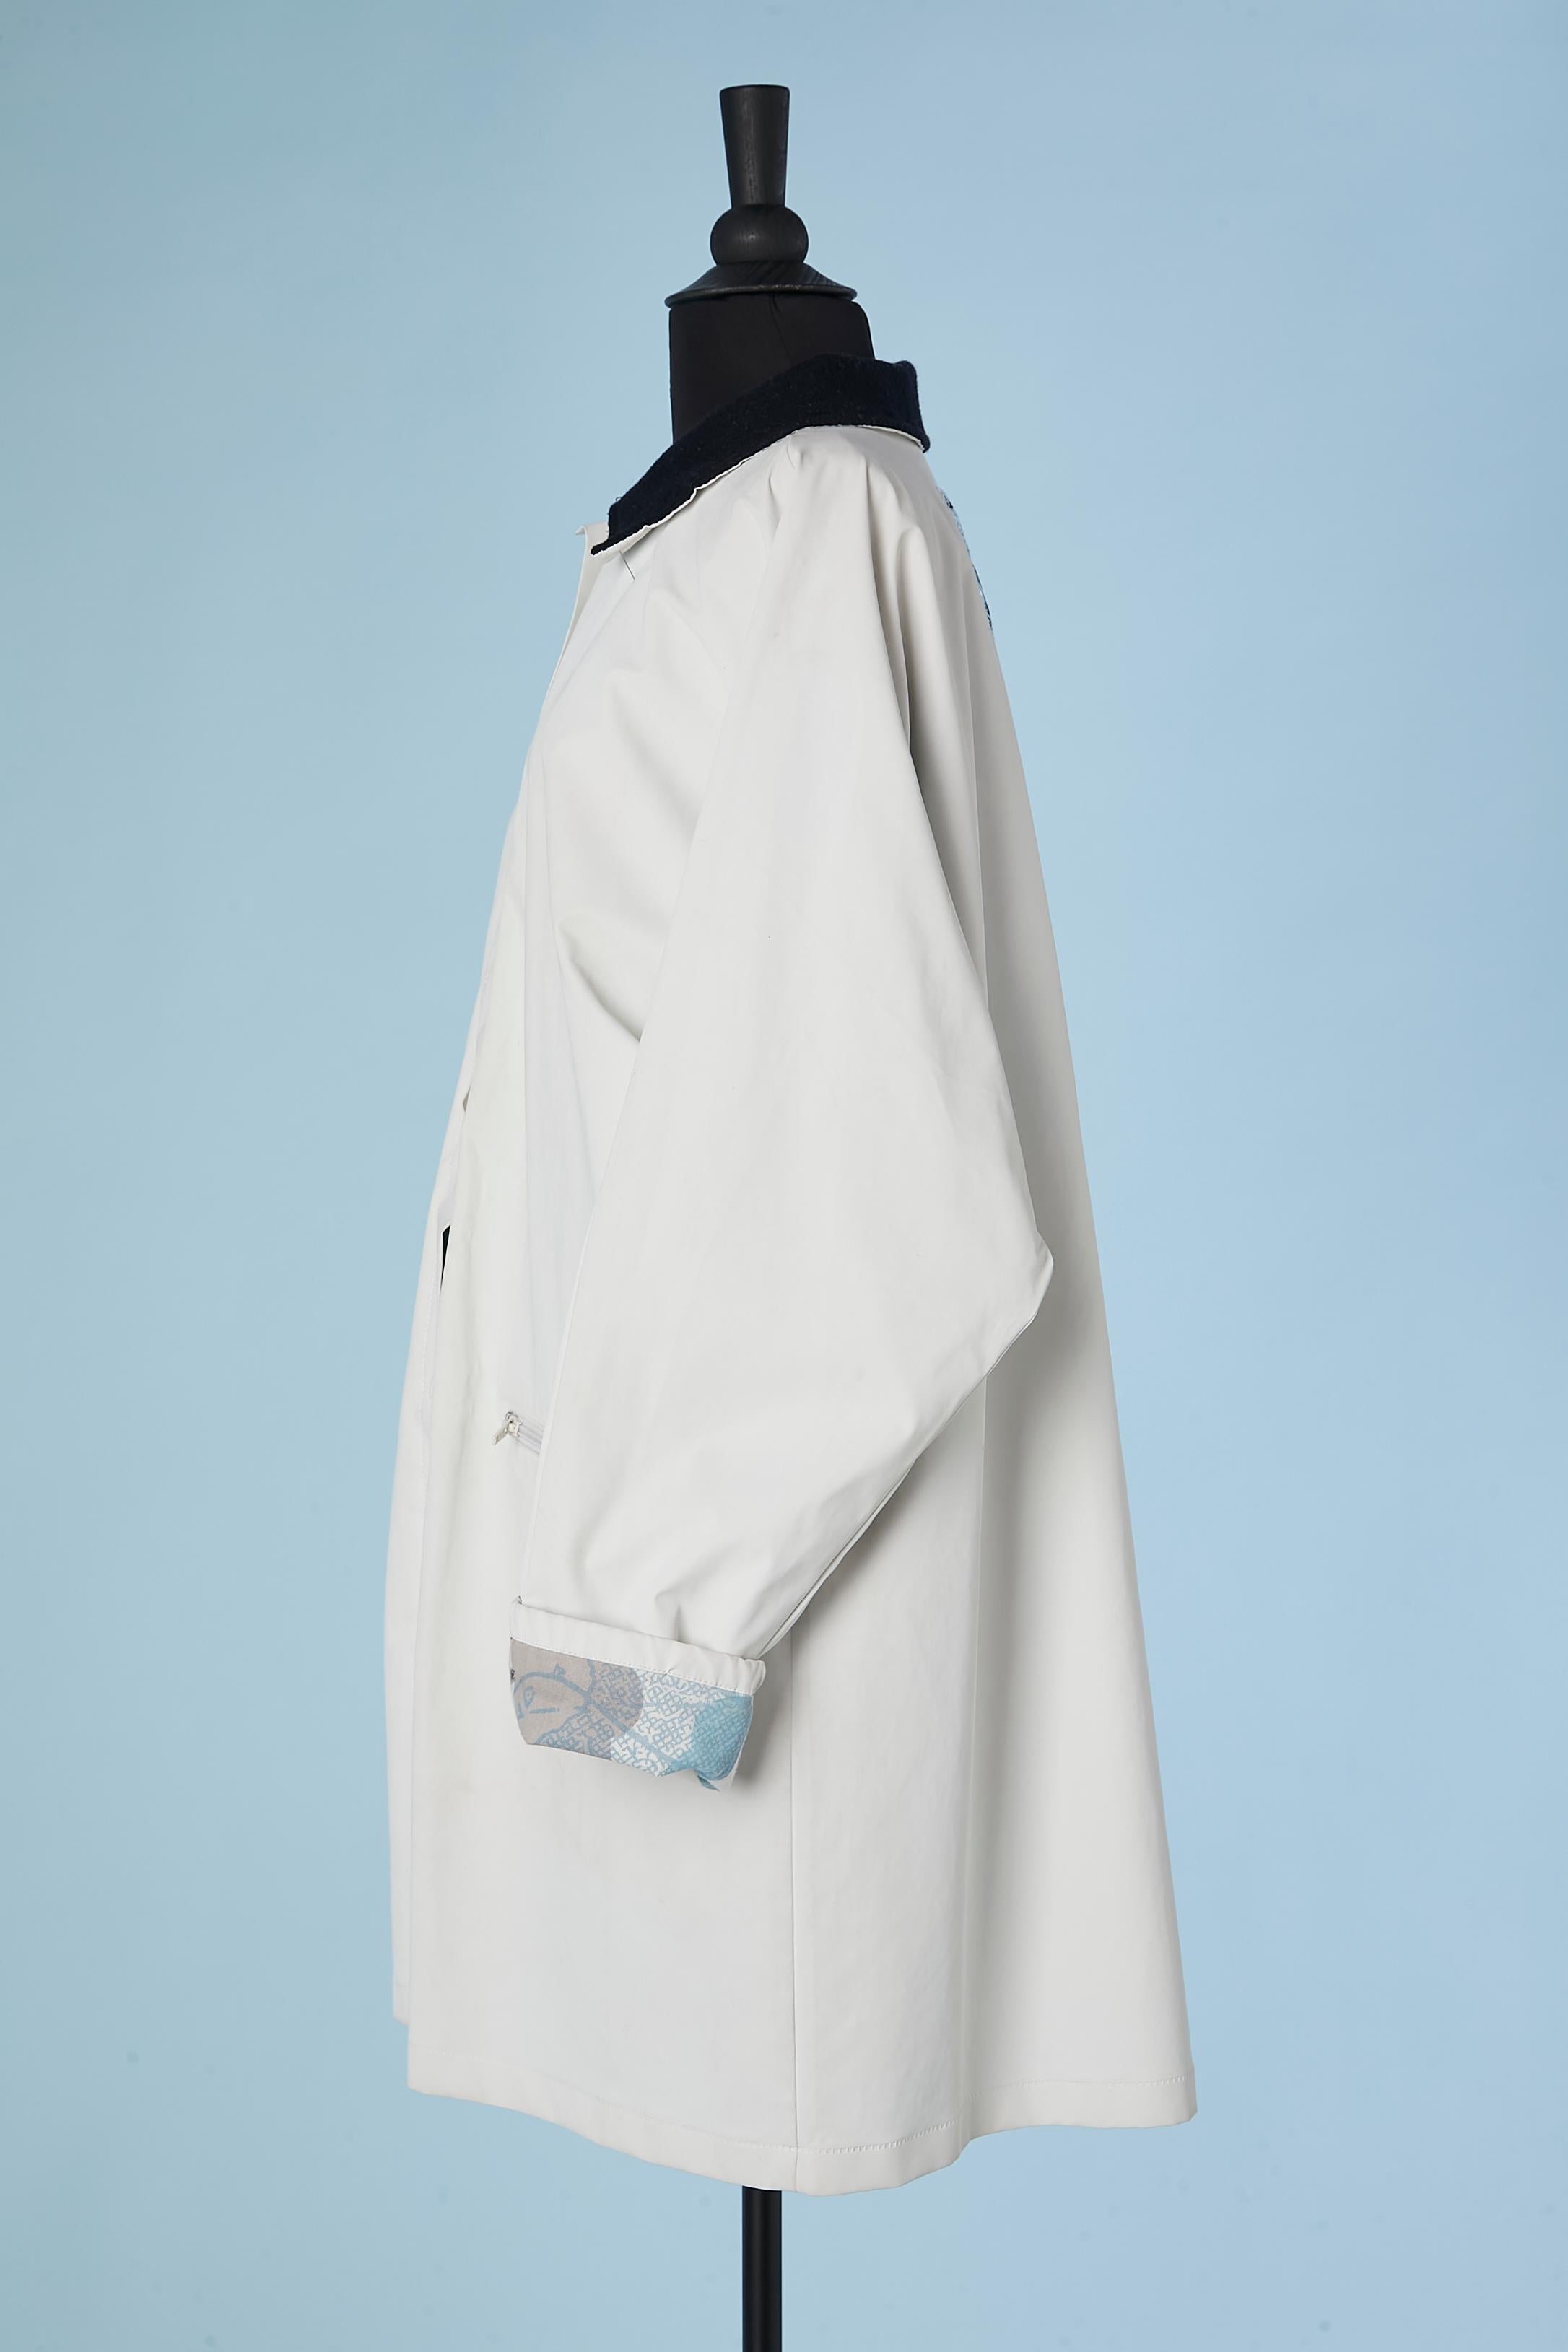 White PVC raincoat with wool collar and printed cotton lining JC De Castelbajac  In Excellent Condition For Sale In Saint-Ouen-Sur-Seine, FR